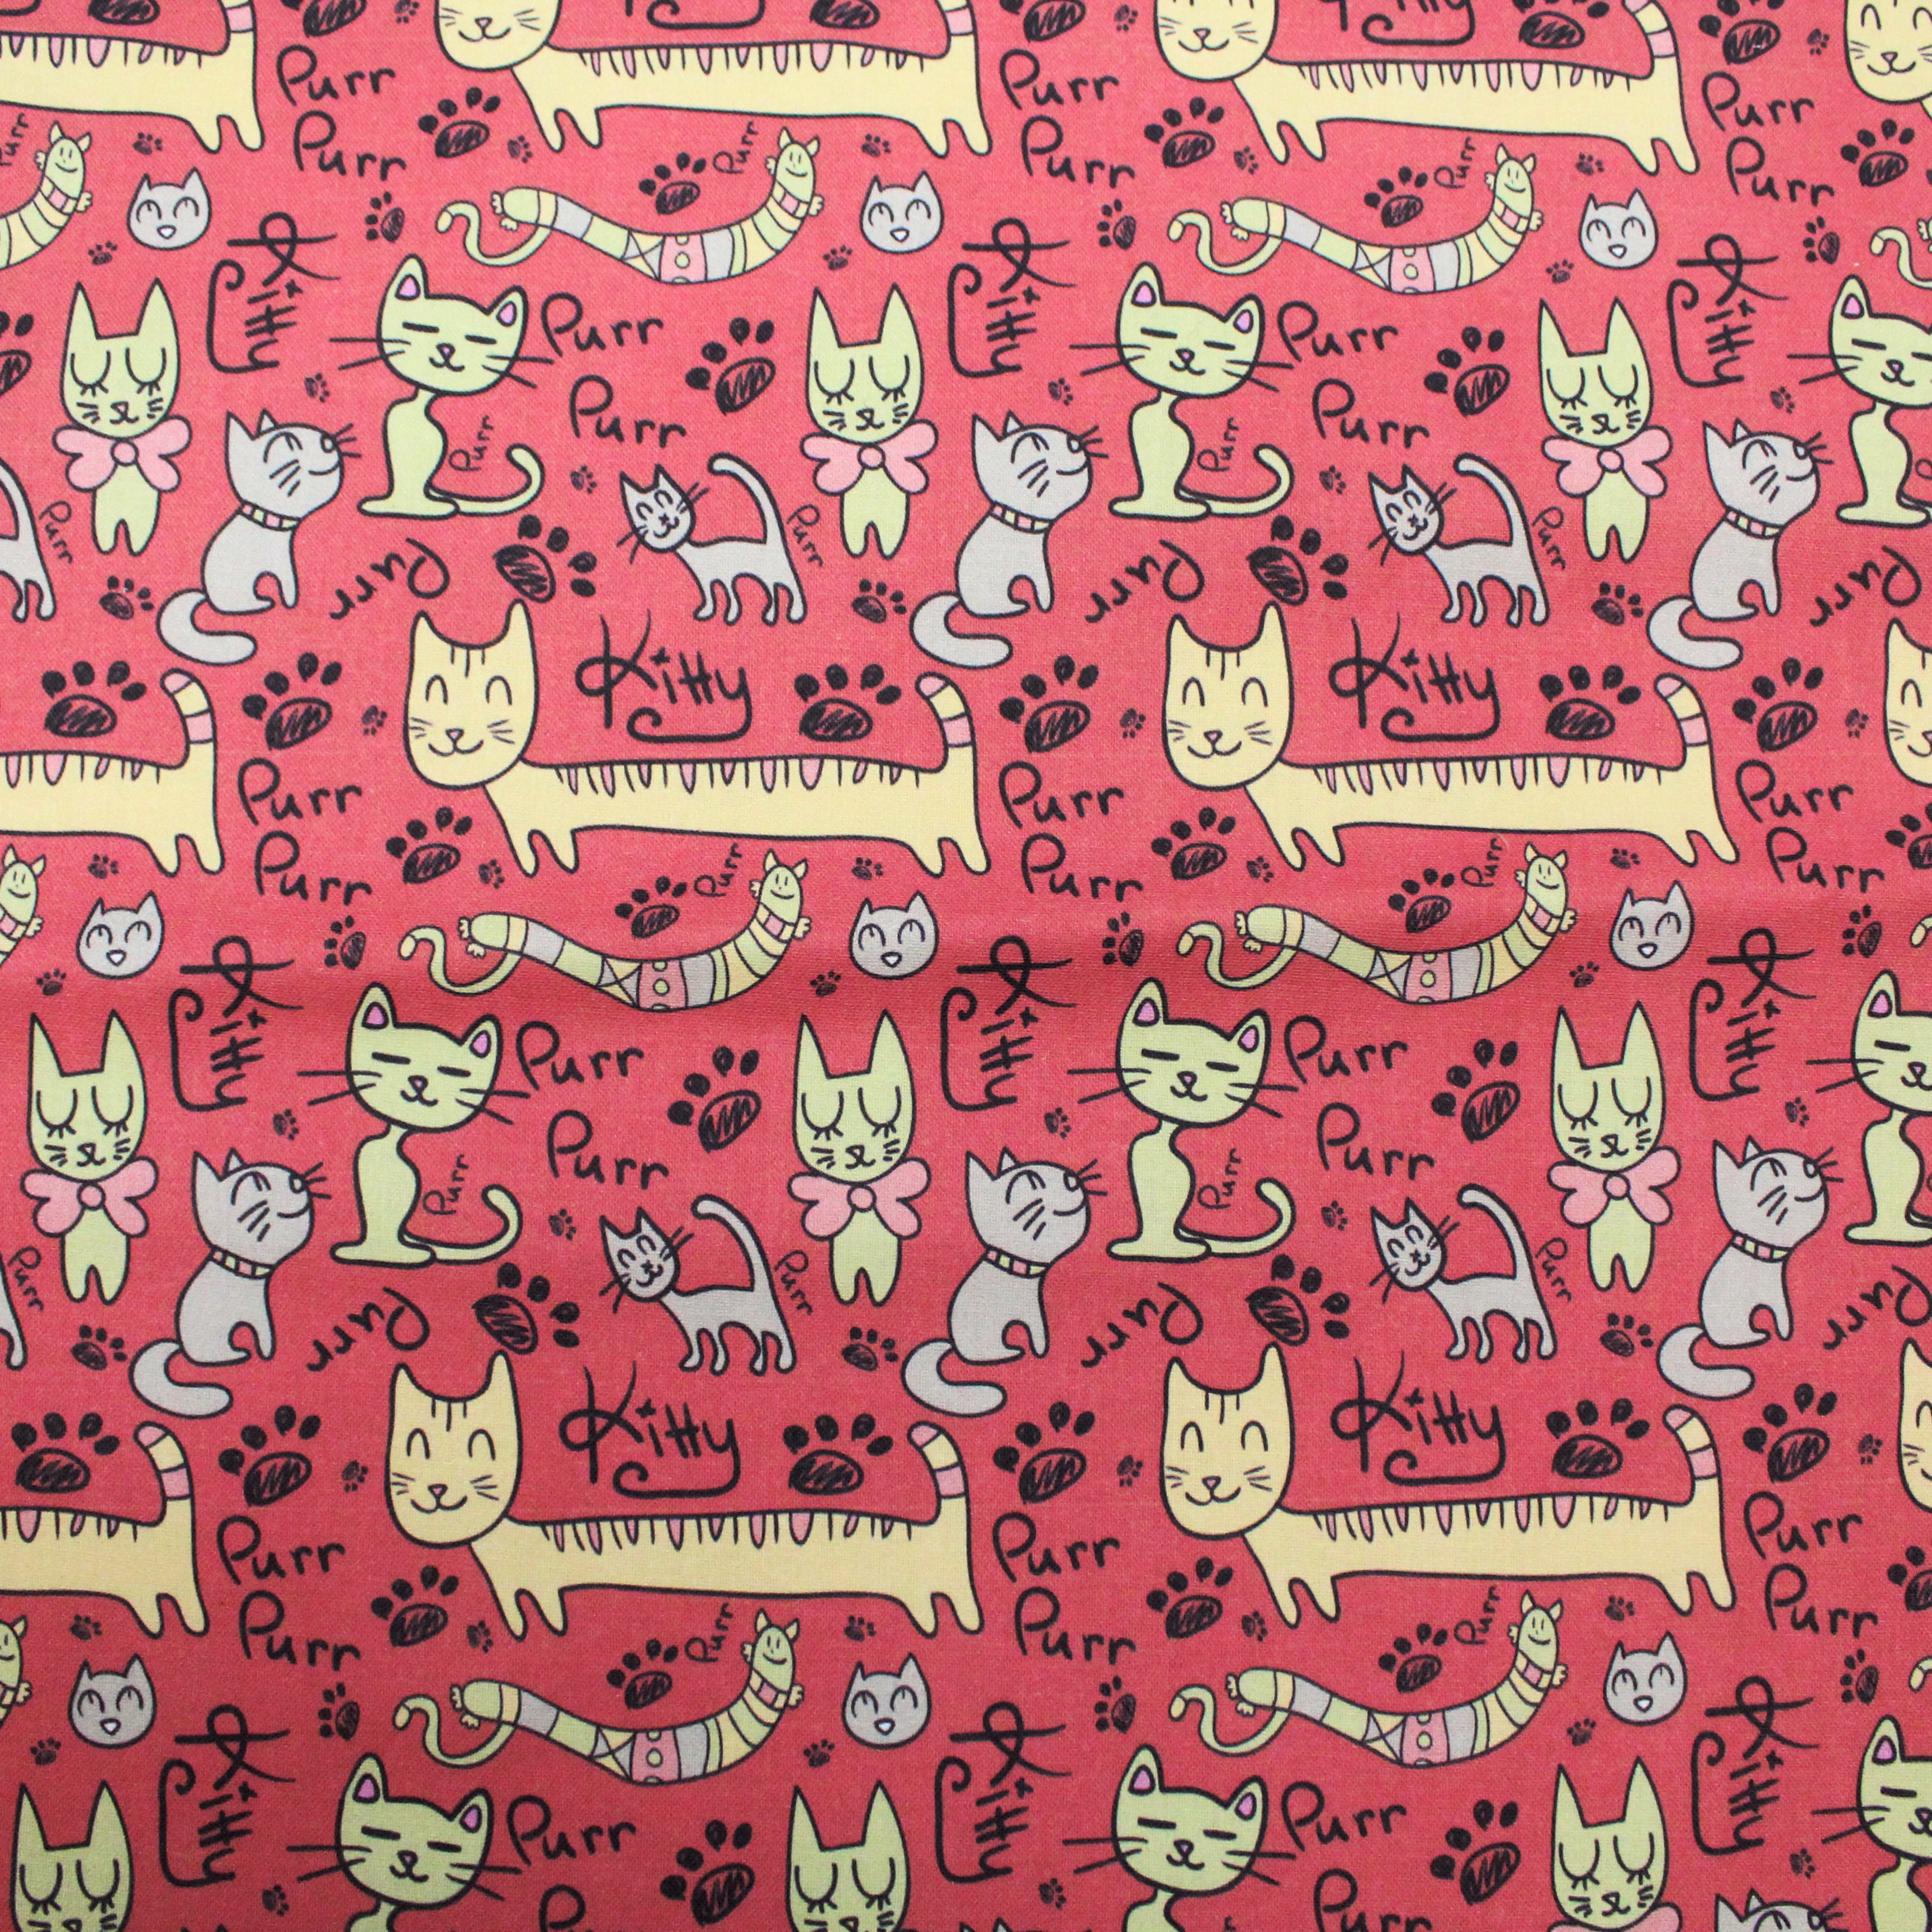 100% Cotton- Kitty Bows - 145cm Wide